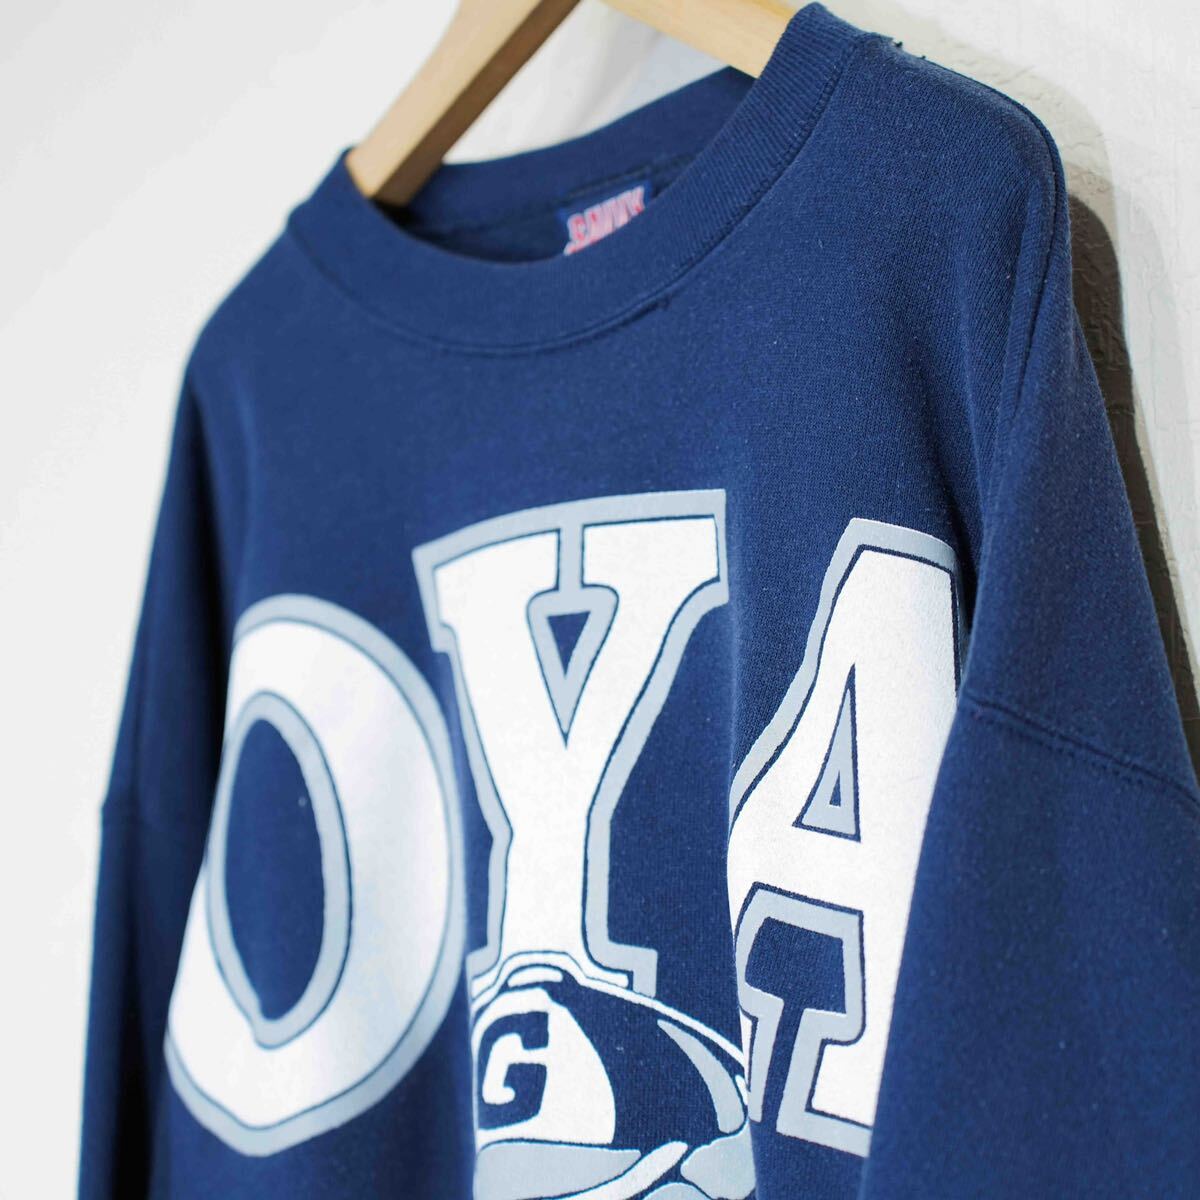 *SPECIAL ITEM* USA VINTAGE SAVVY COLLEGE PRINT DESIGN SWEAT SHIRT/アメリカ古着カレッジリングプリントデザインスウェット_画像6